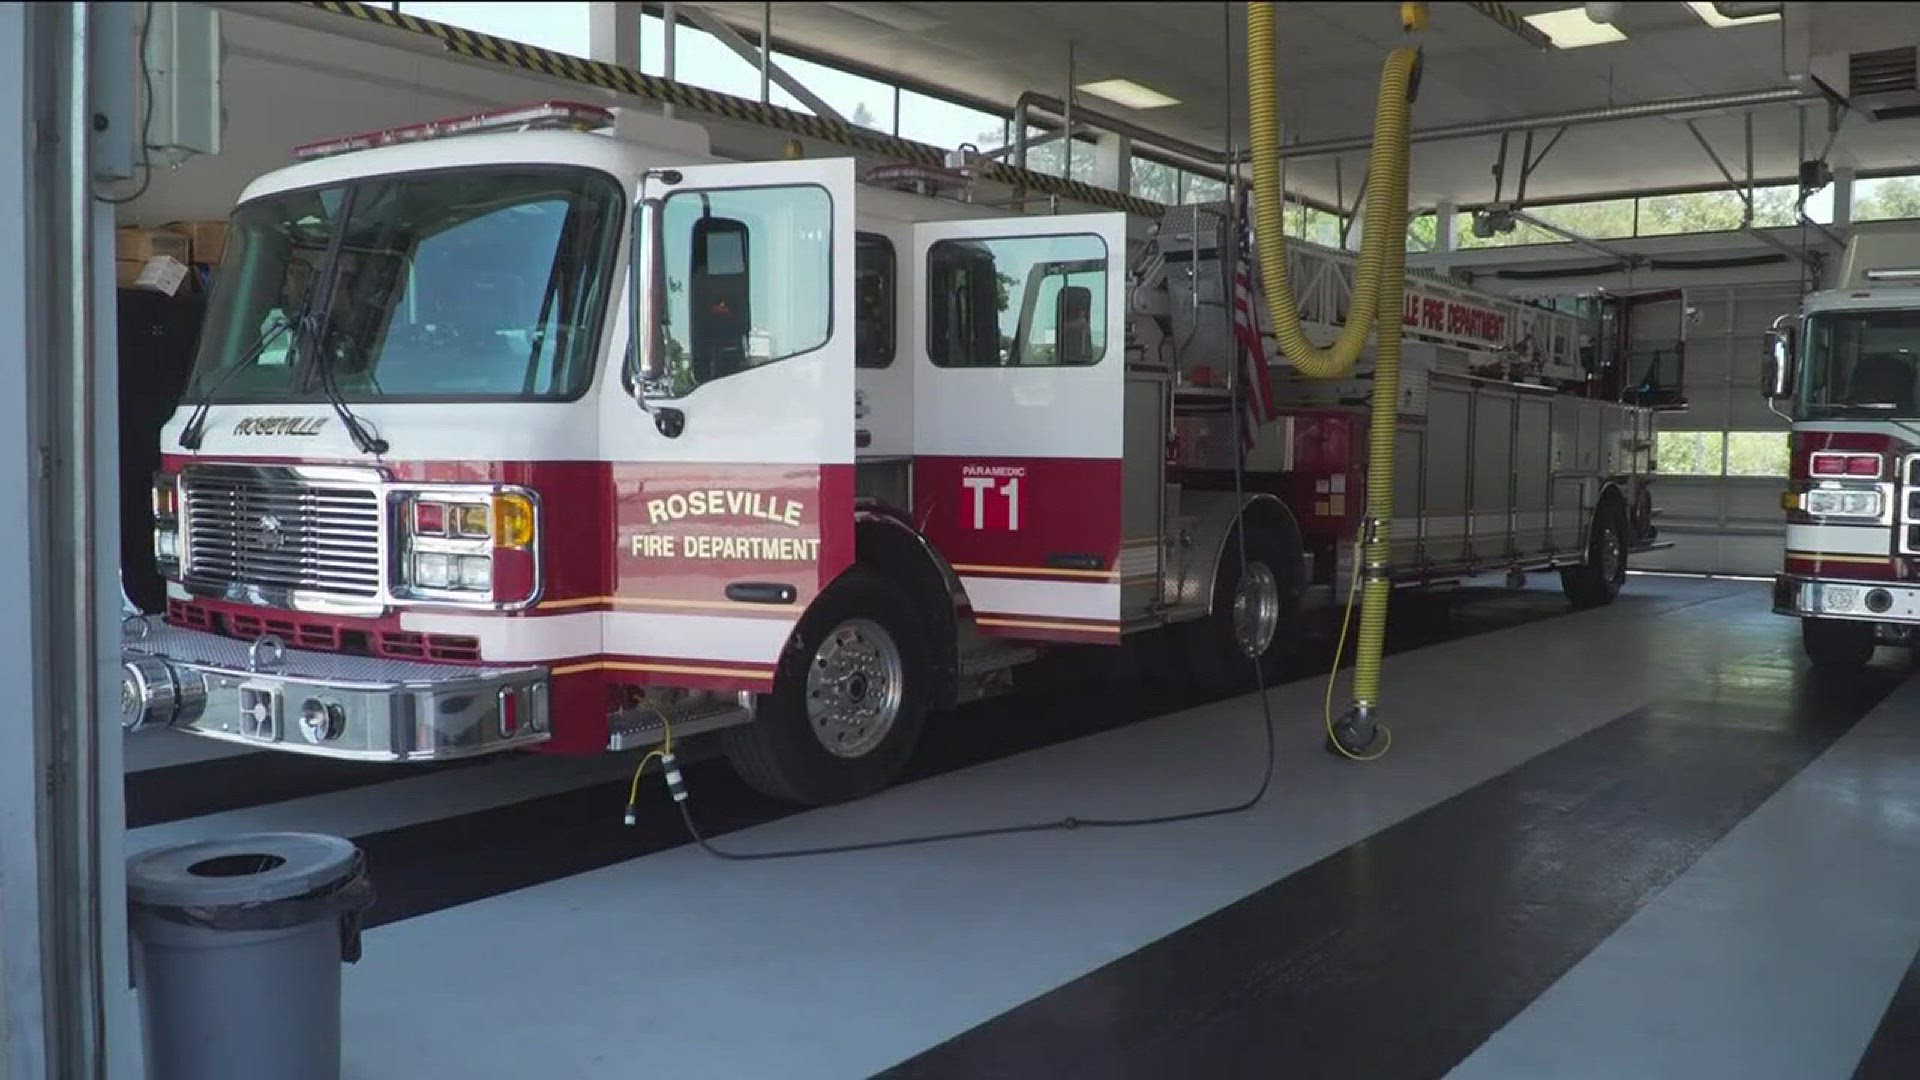 The city of Roseville aims to cut back on firefighter ladder truck staffing, but firefighters say that's not the way to save money.